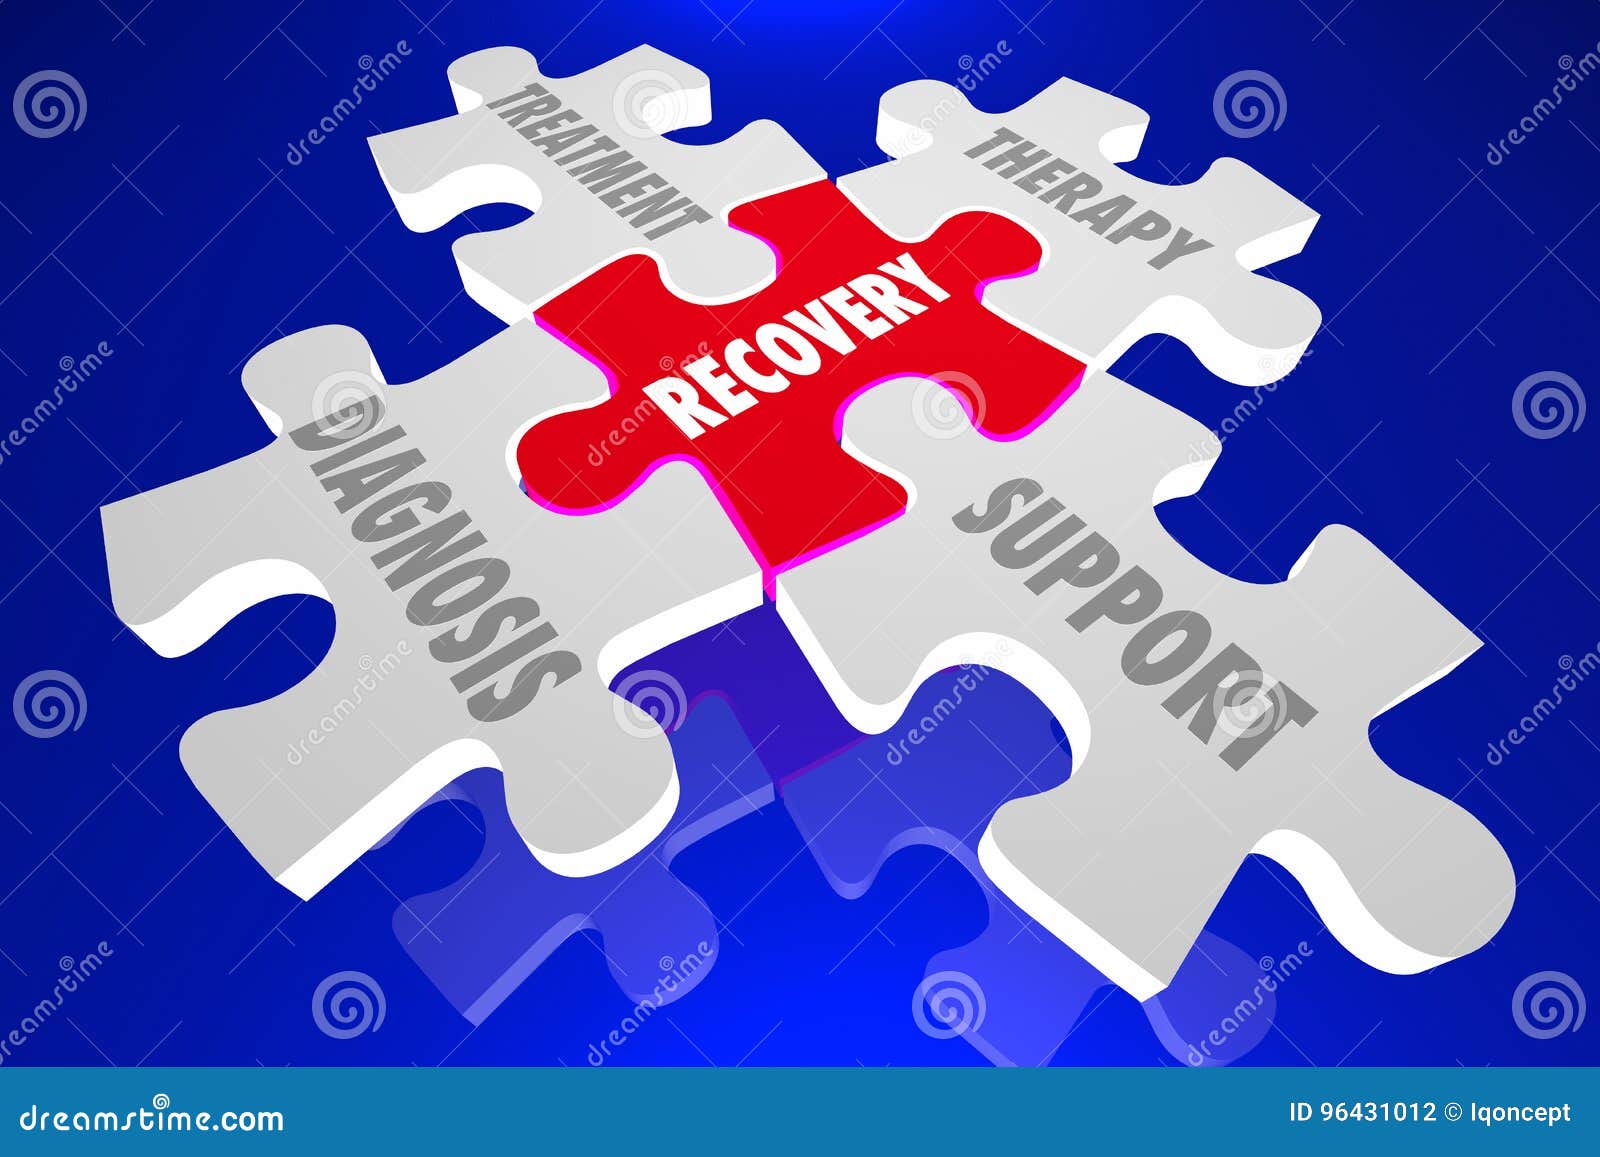 recovery diagnosis treatment support therapy puzzle pieces 3d il